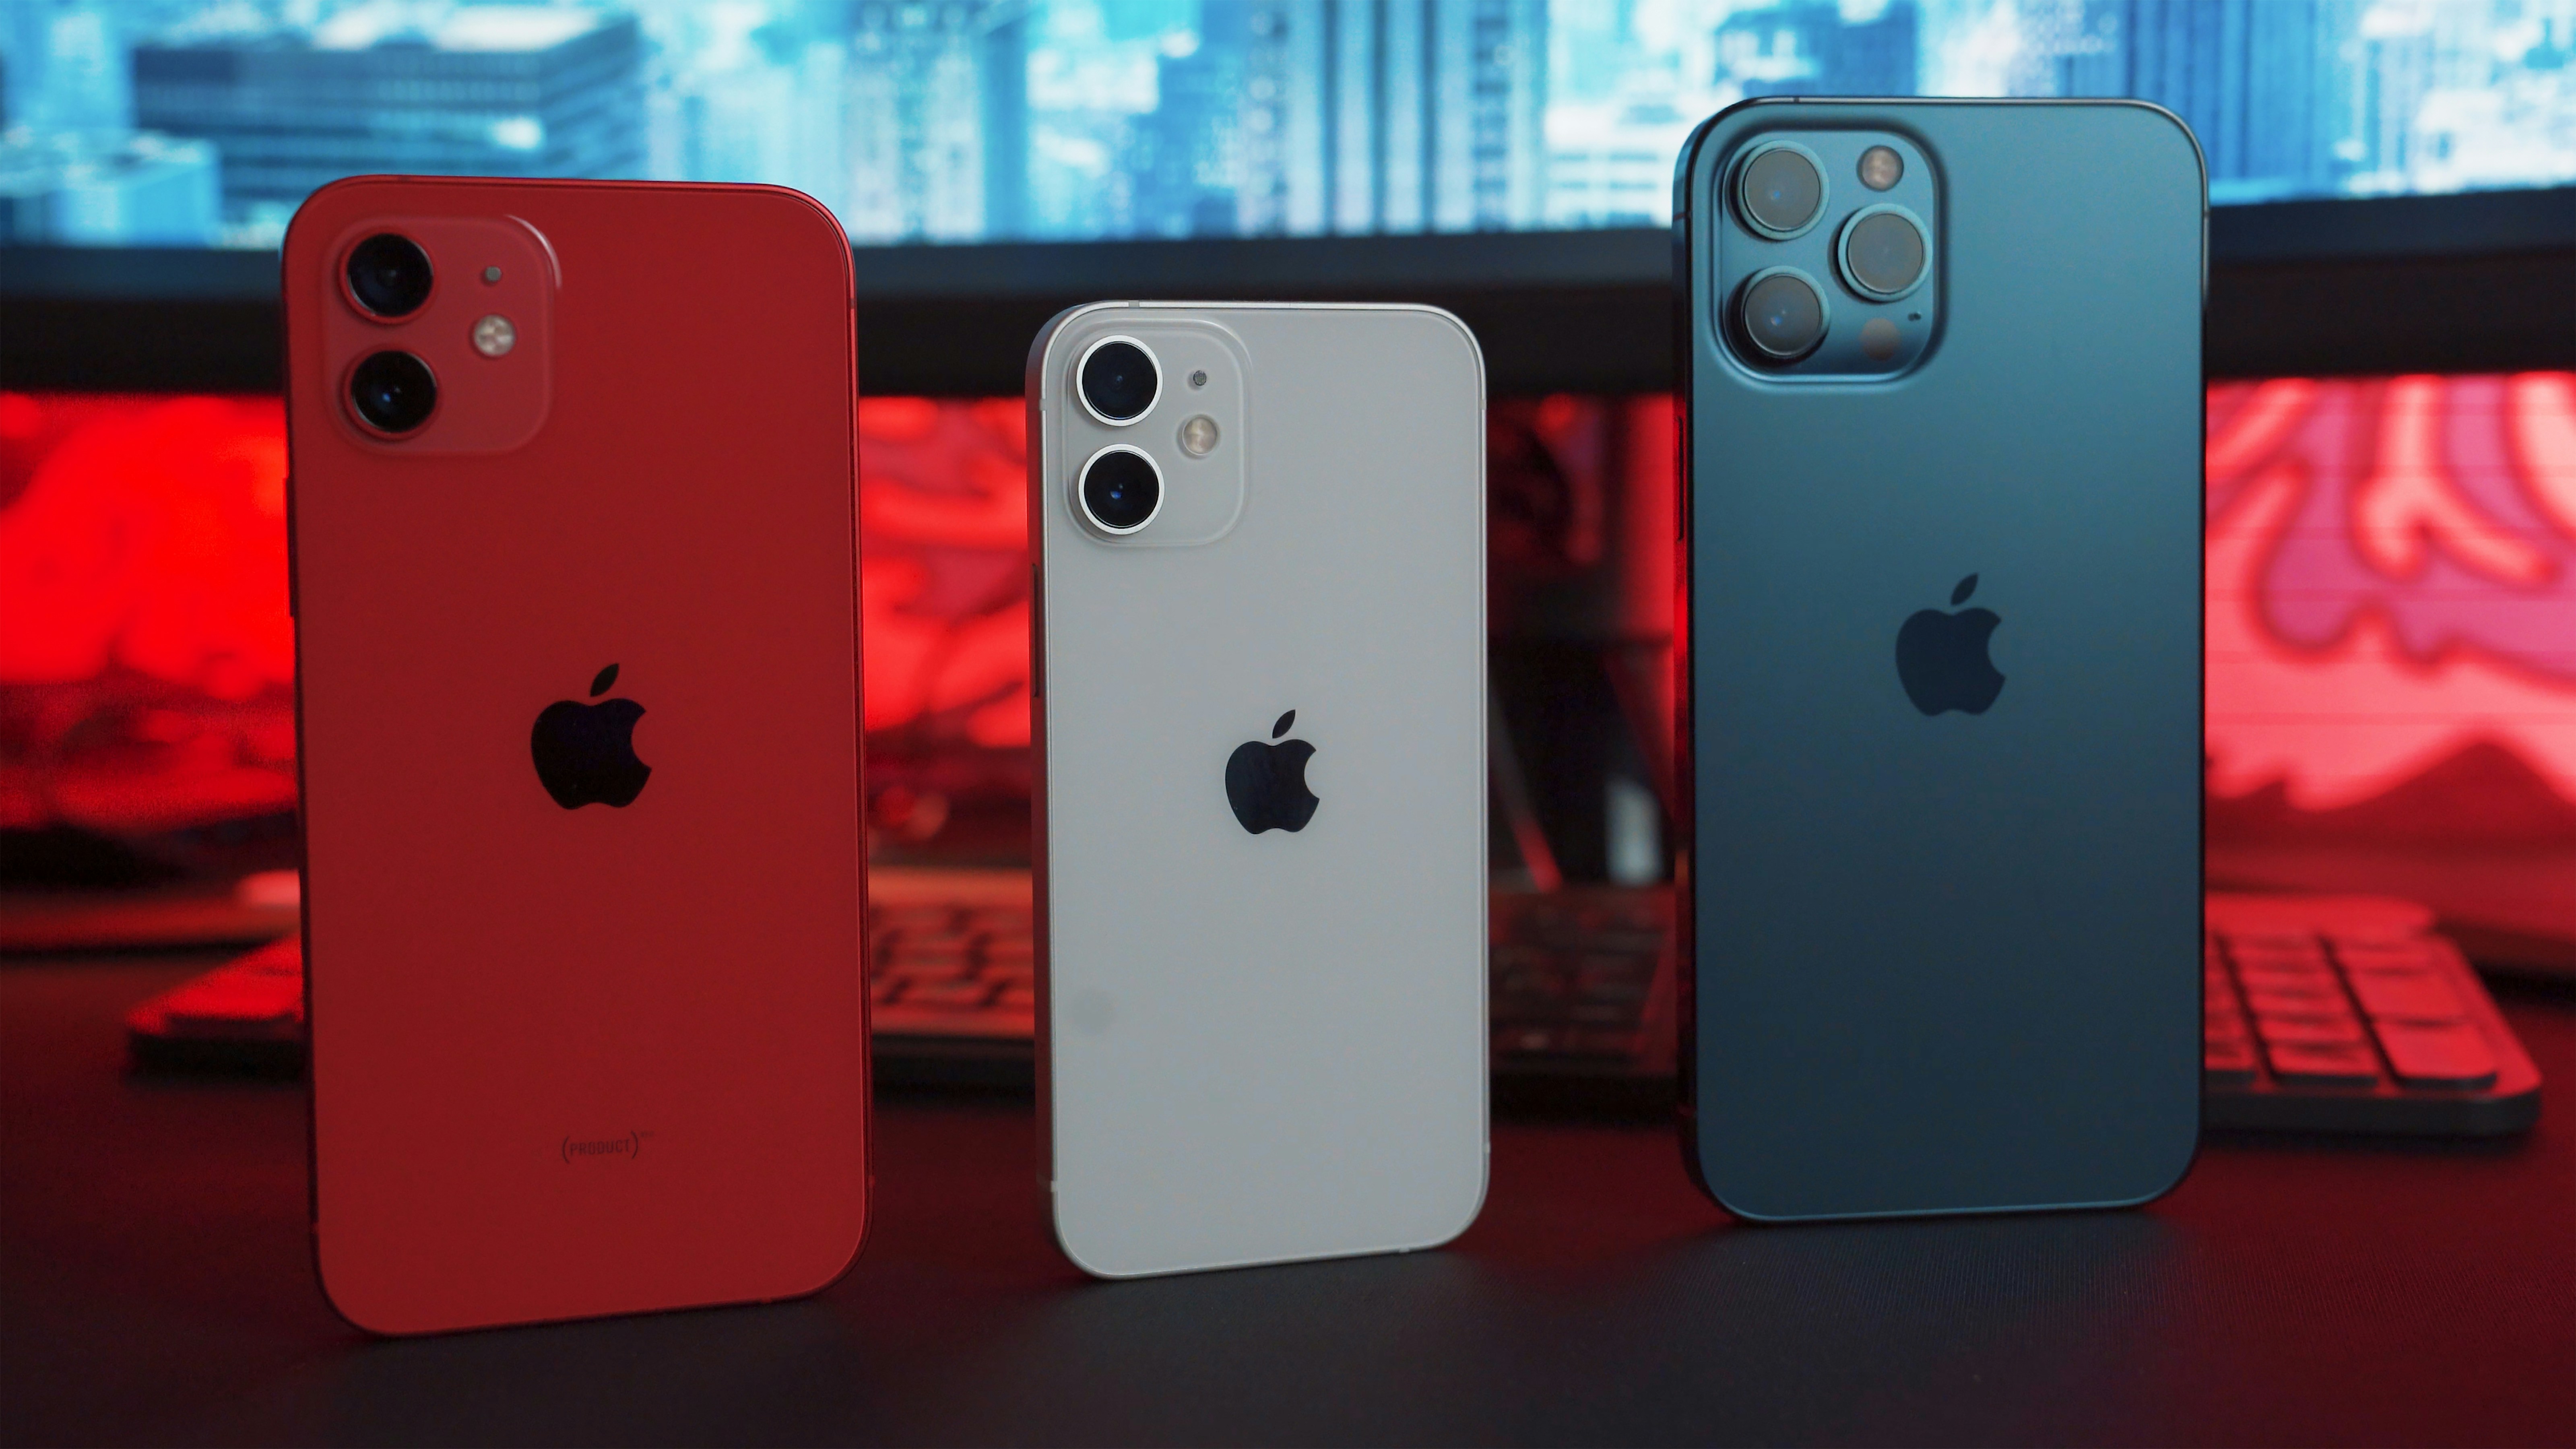 Close up iPhone 12, iPhone 12 mini and iPhone 12 Pro Max